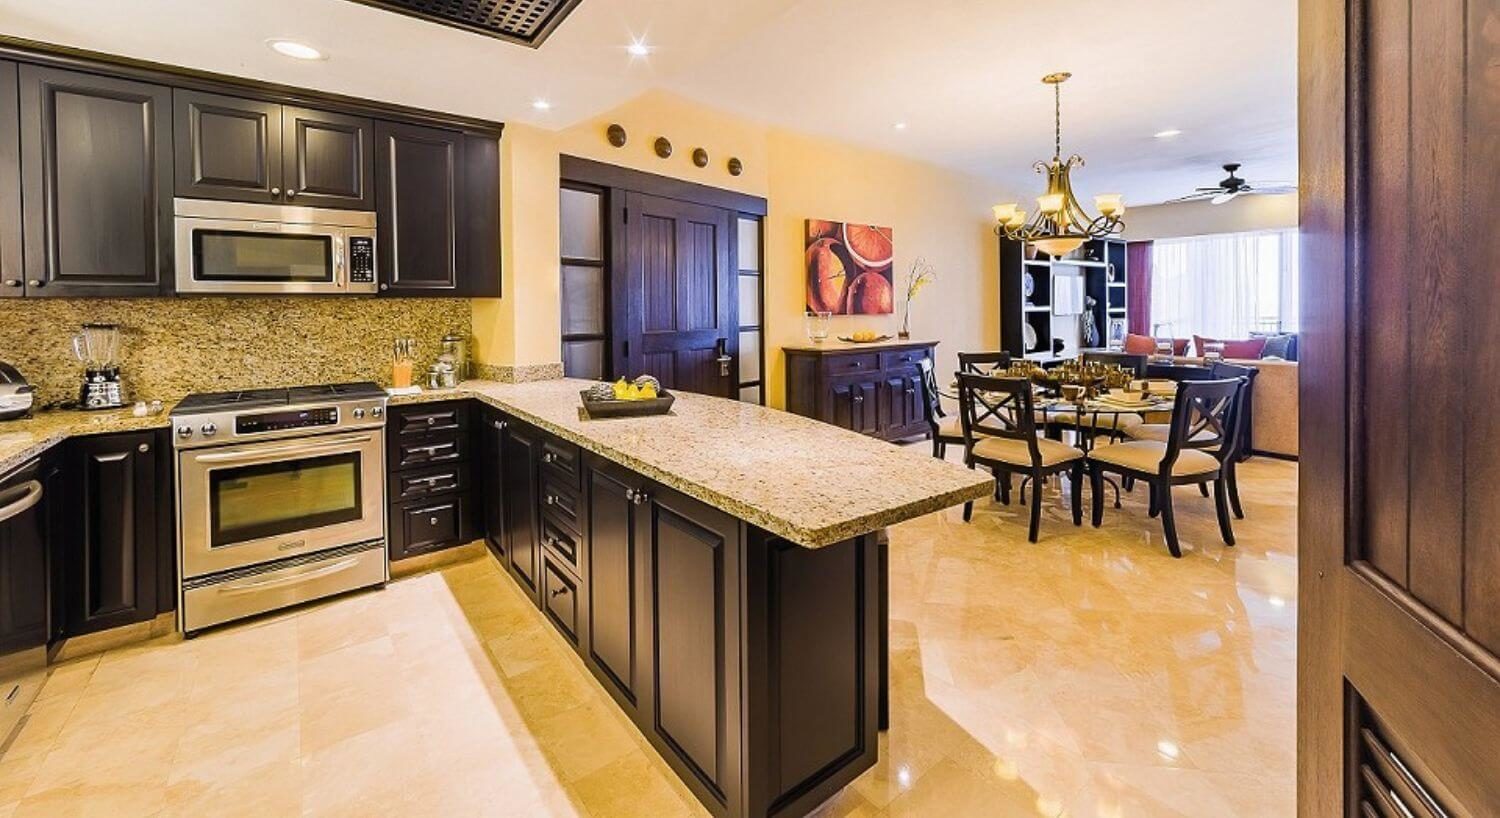 A large U shaped kitchen with stainless steel appliances. dark brown cupboards, granite countertops, a dining area with a round glass table and brown and dark brown chairs with plush tan cushions, a matching sideboared, and living room, and sliding doors leading out to a patio.